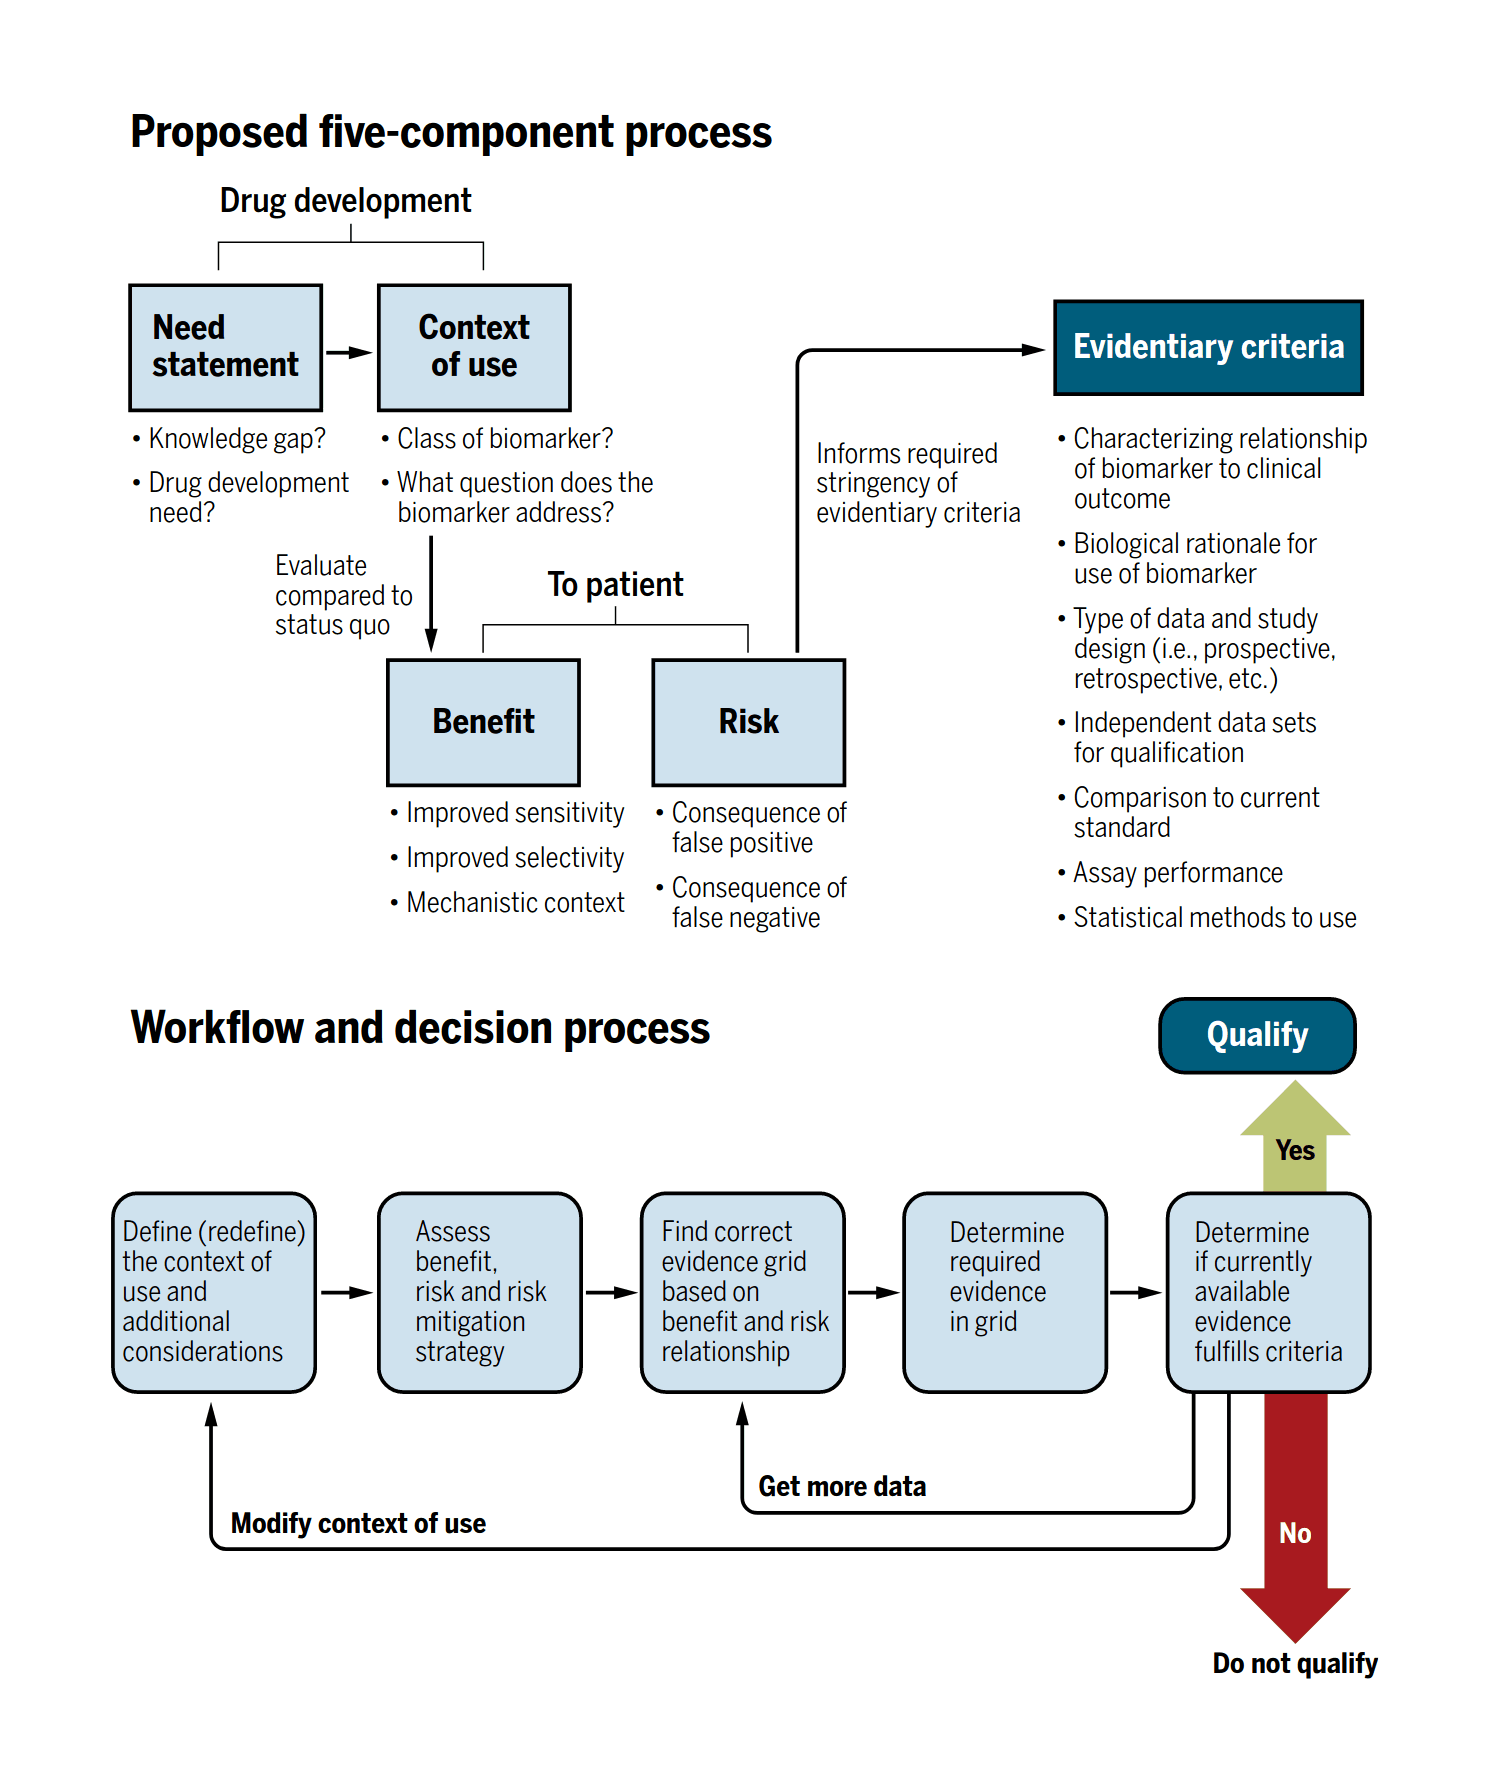 Figure 1: Proposed evidentiary criteria framework. An illustration of the steps in the process for defining the appropriate amount of evidence needed to use a biomarker from the point of view of regulatory decision-making. The process requires defining the detailed limits of the decision and collecting the appropriate data based on how the decision will affect patients. Given the complexity of data collection, the process involves multiple conversations with the regulatory agency and can circle back if the decision or COU needs to be changed during the process